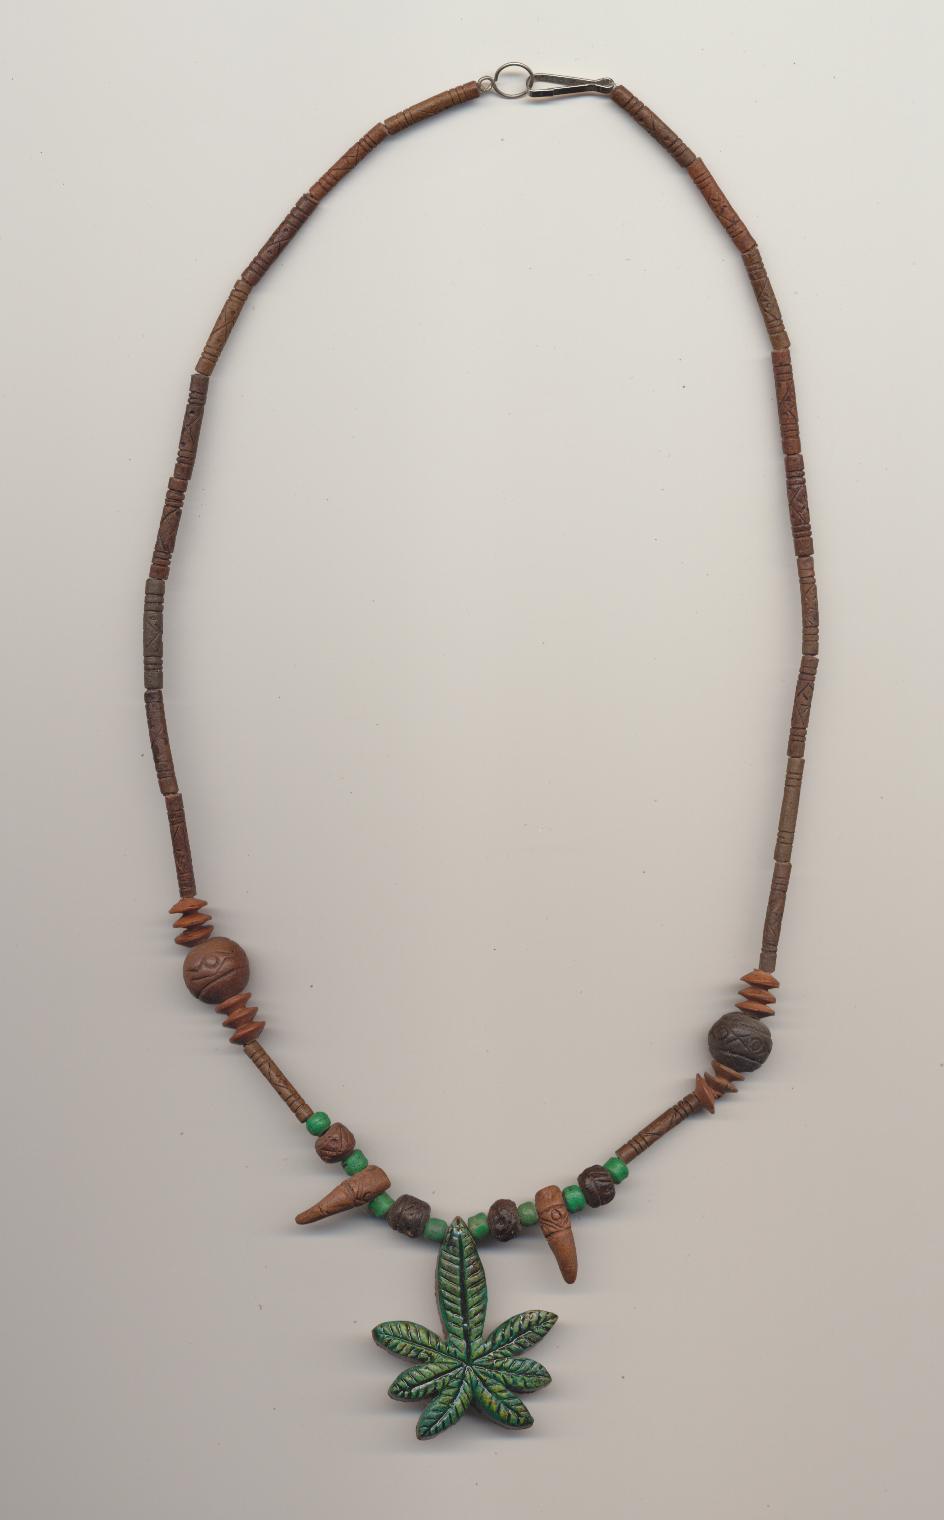 Vintage necklace for boys in hippie style, made of clay beads, Peru, 1960's, length necklace 19'' 48cm., pendant 1.5'' 4cm.